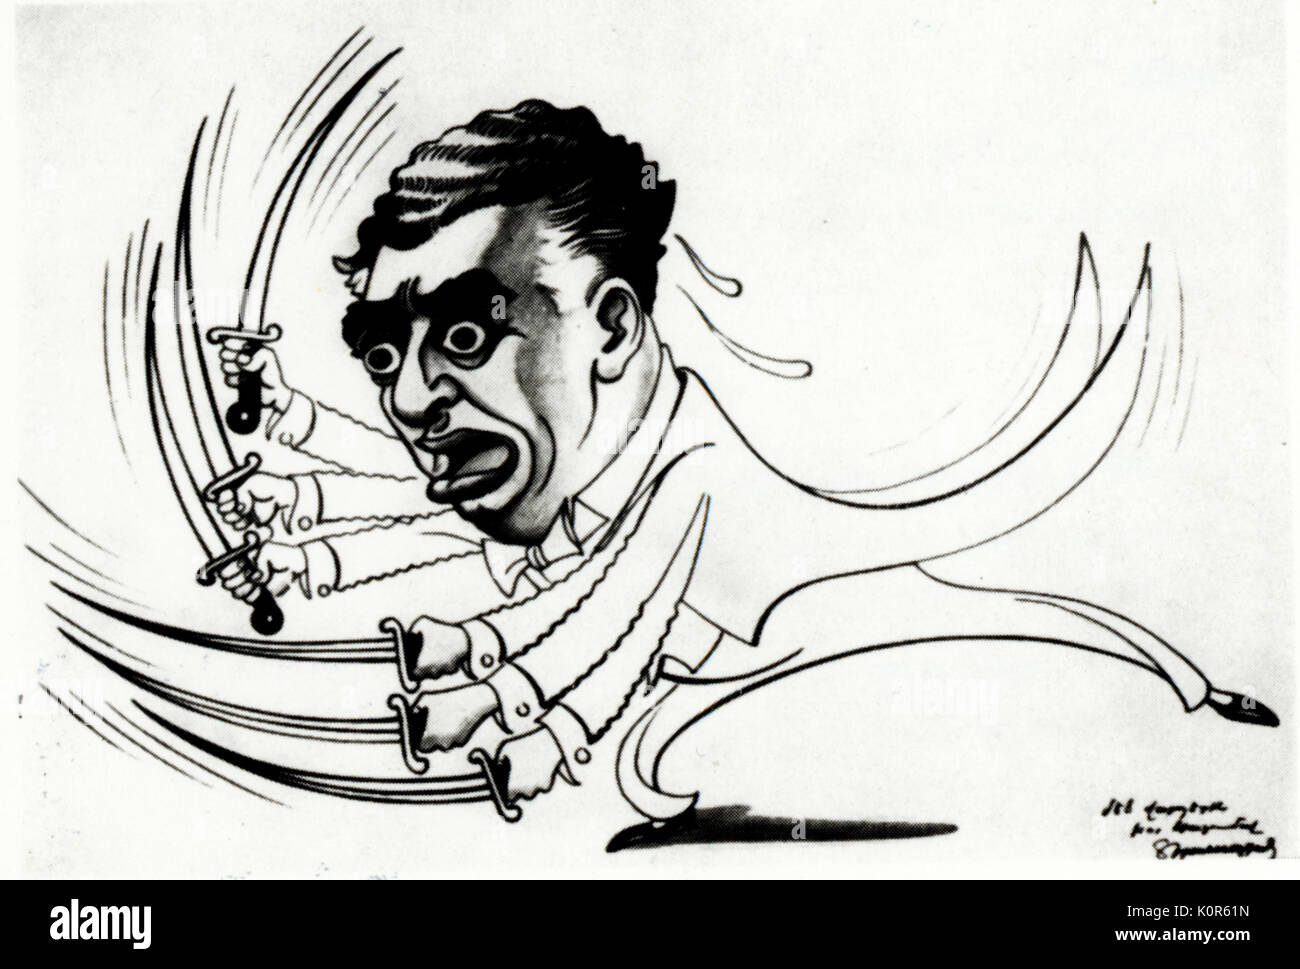 KHACHATURIAN, Aram. Caricature with sword Reference to Sabre Dance he composed. Russian composer. 1903-1978 Stock Photo